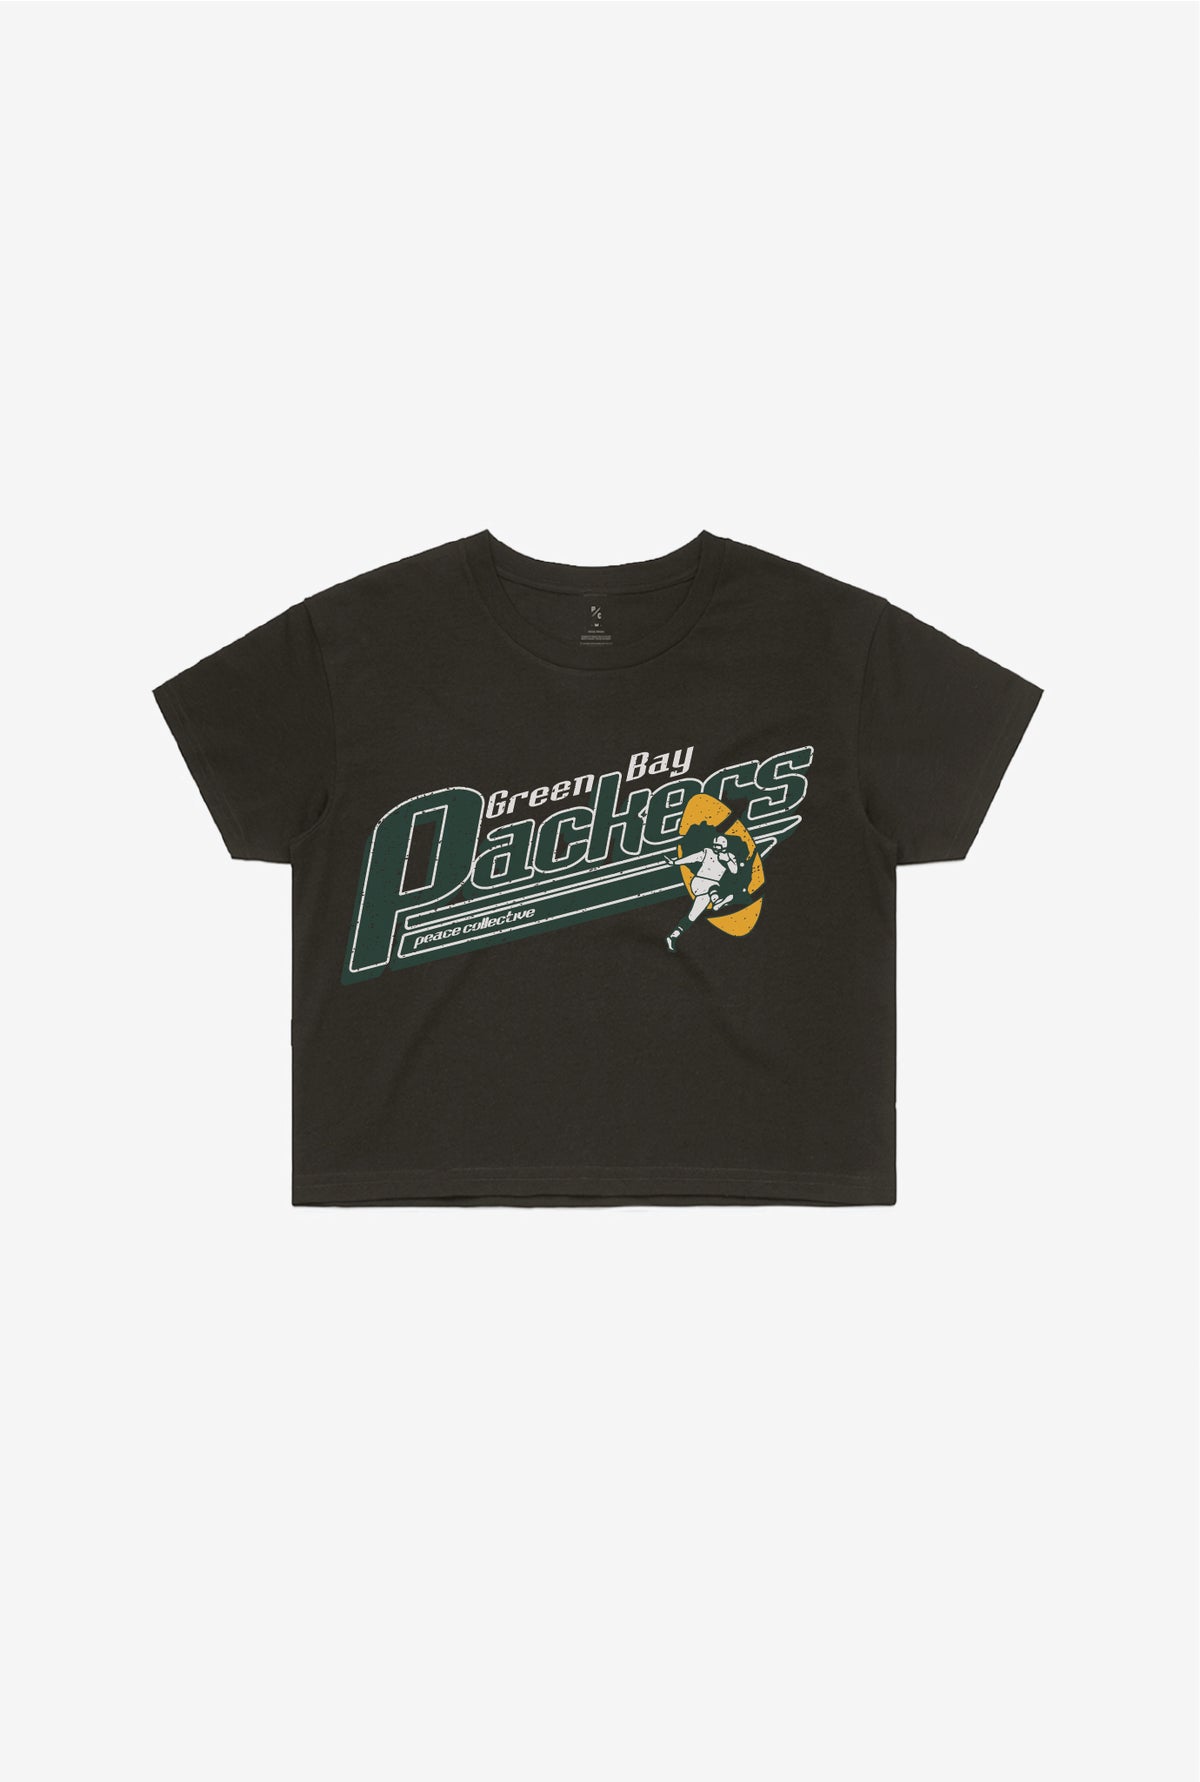 Green Bay Packers Vintage Cropped T-Shirt - Black